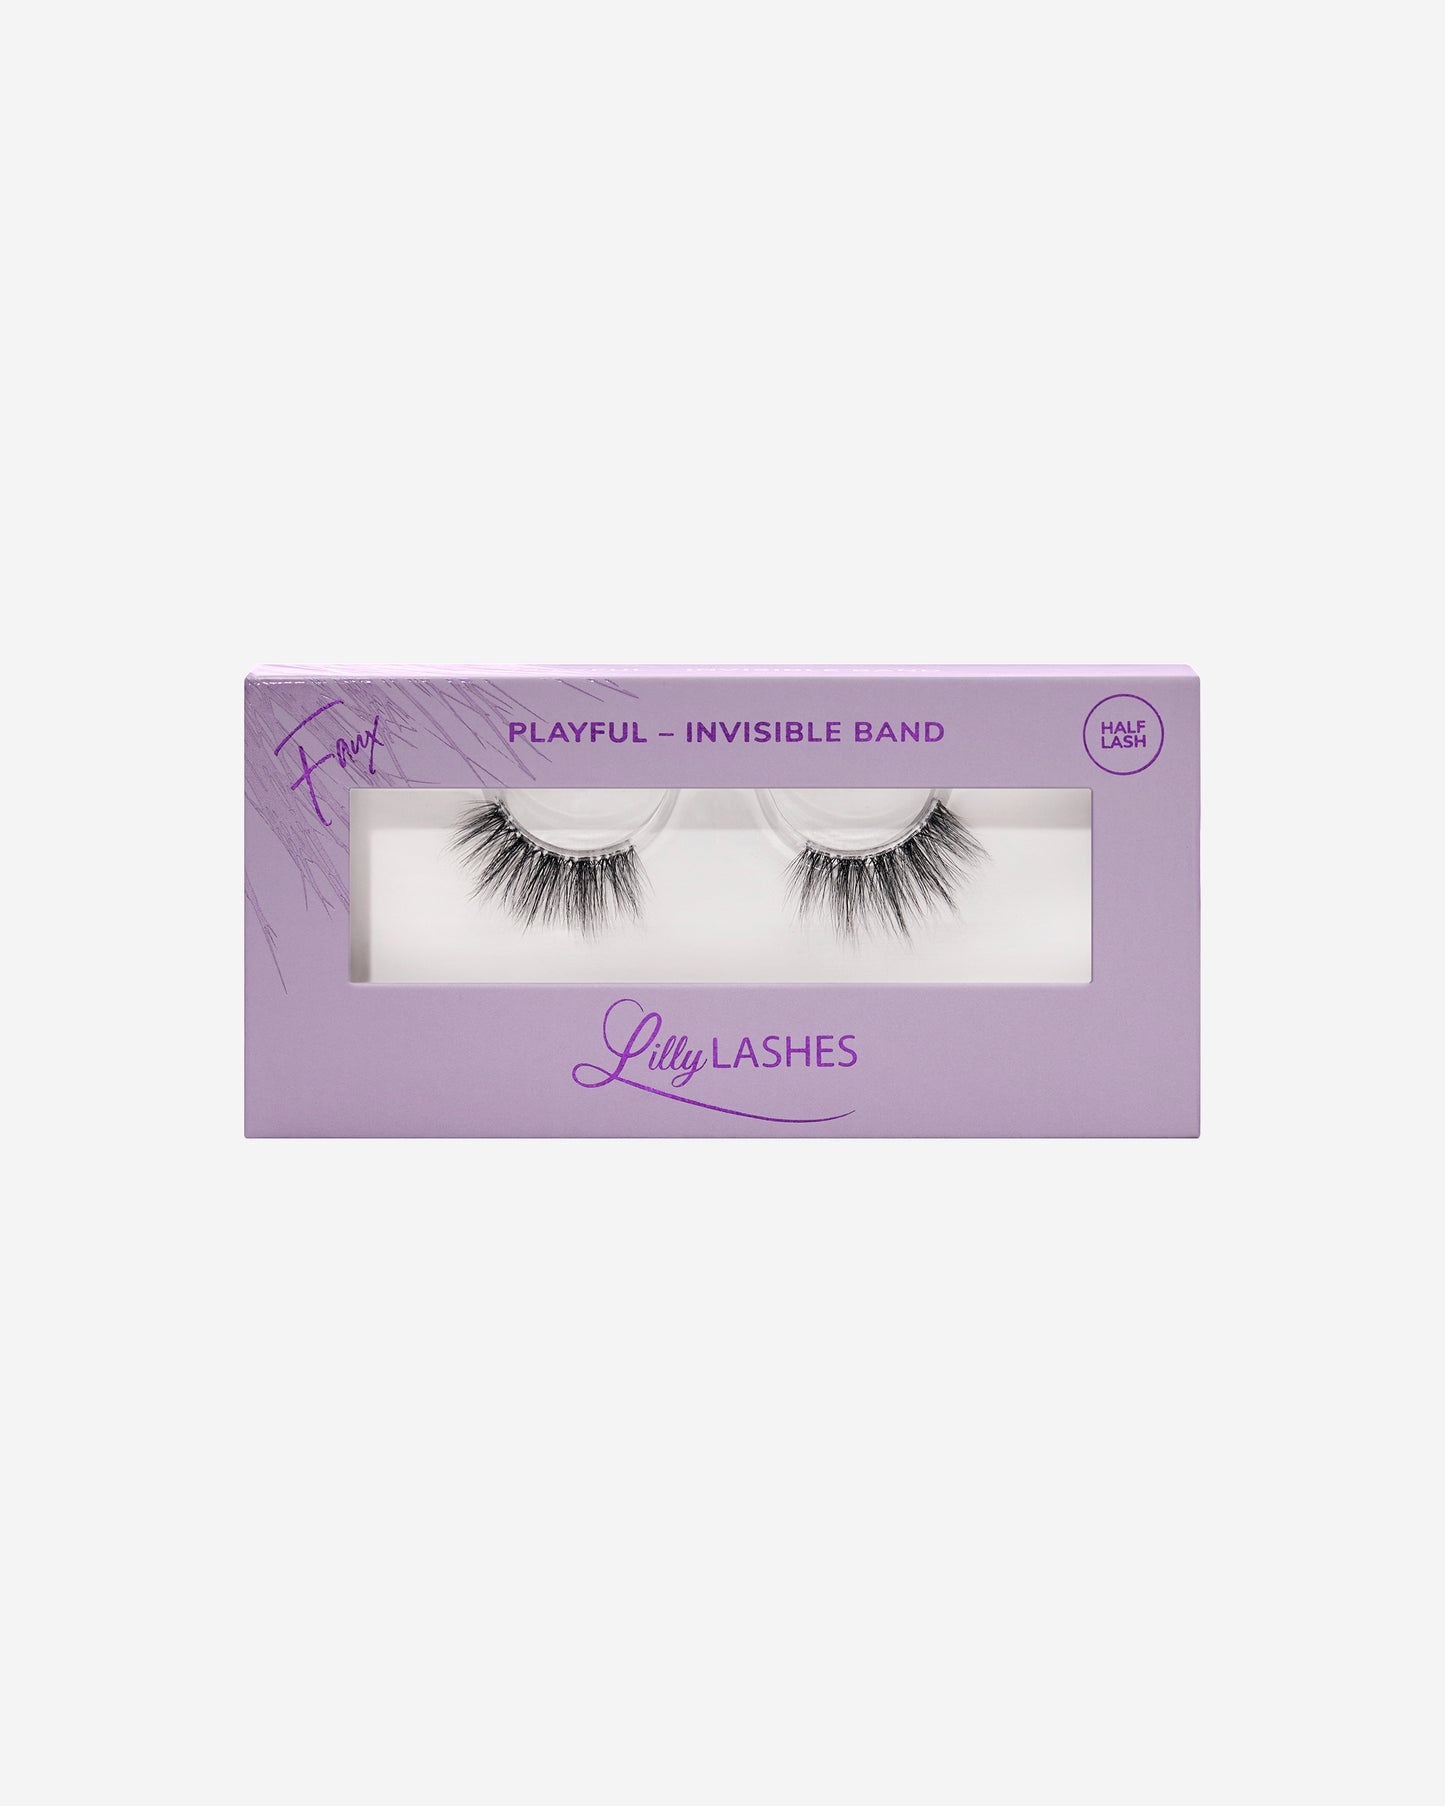 Lilly Lashes | Sheer Band | Playful | Front of Box